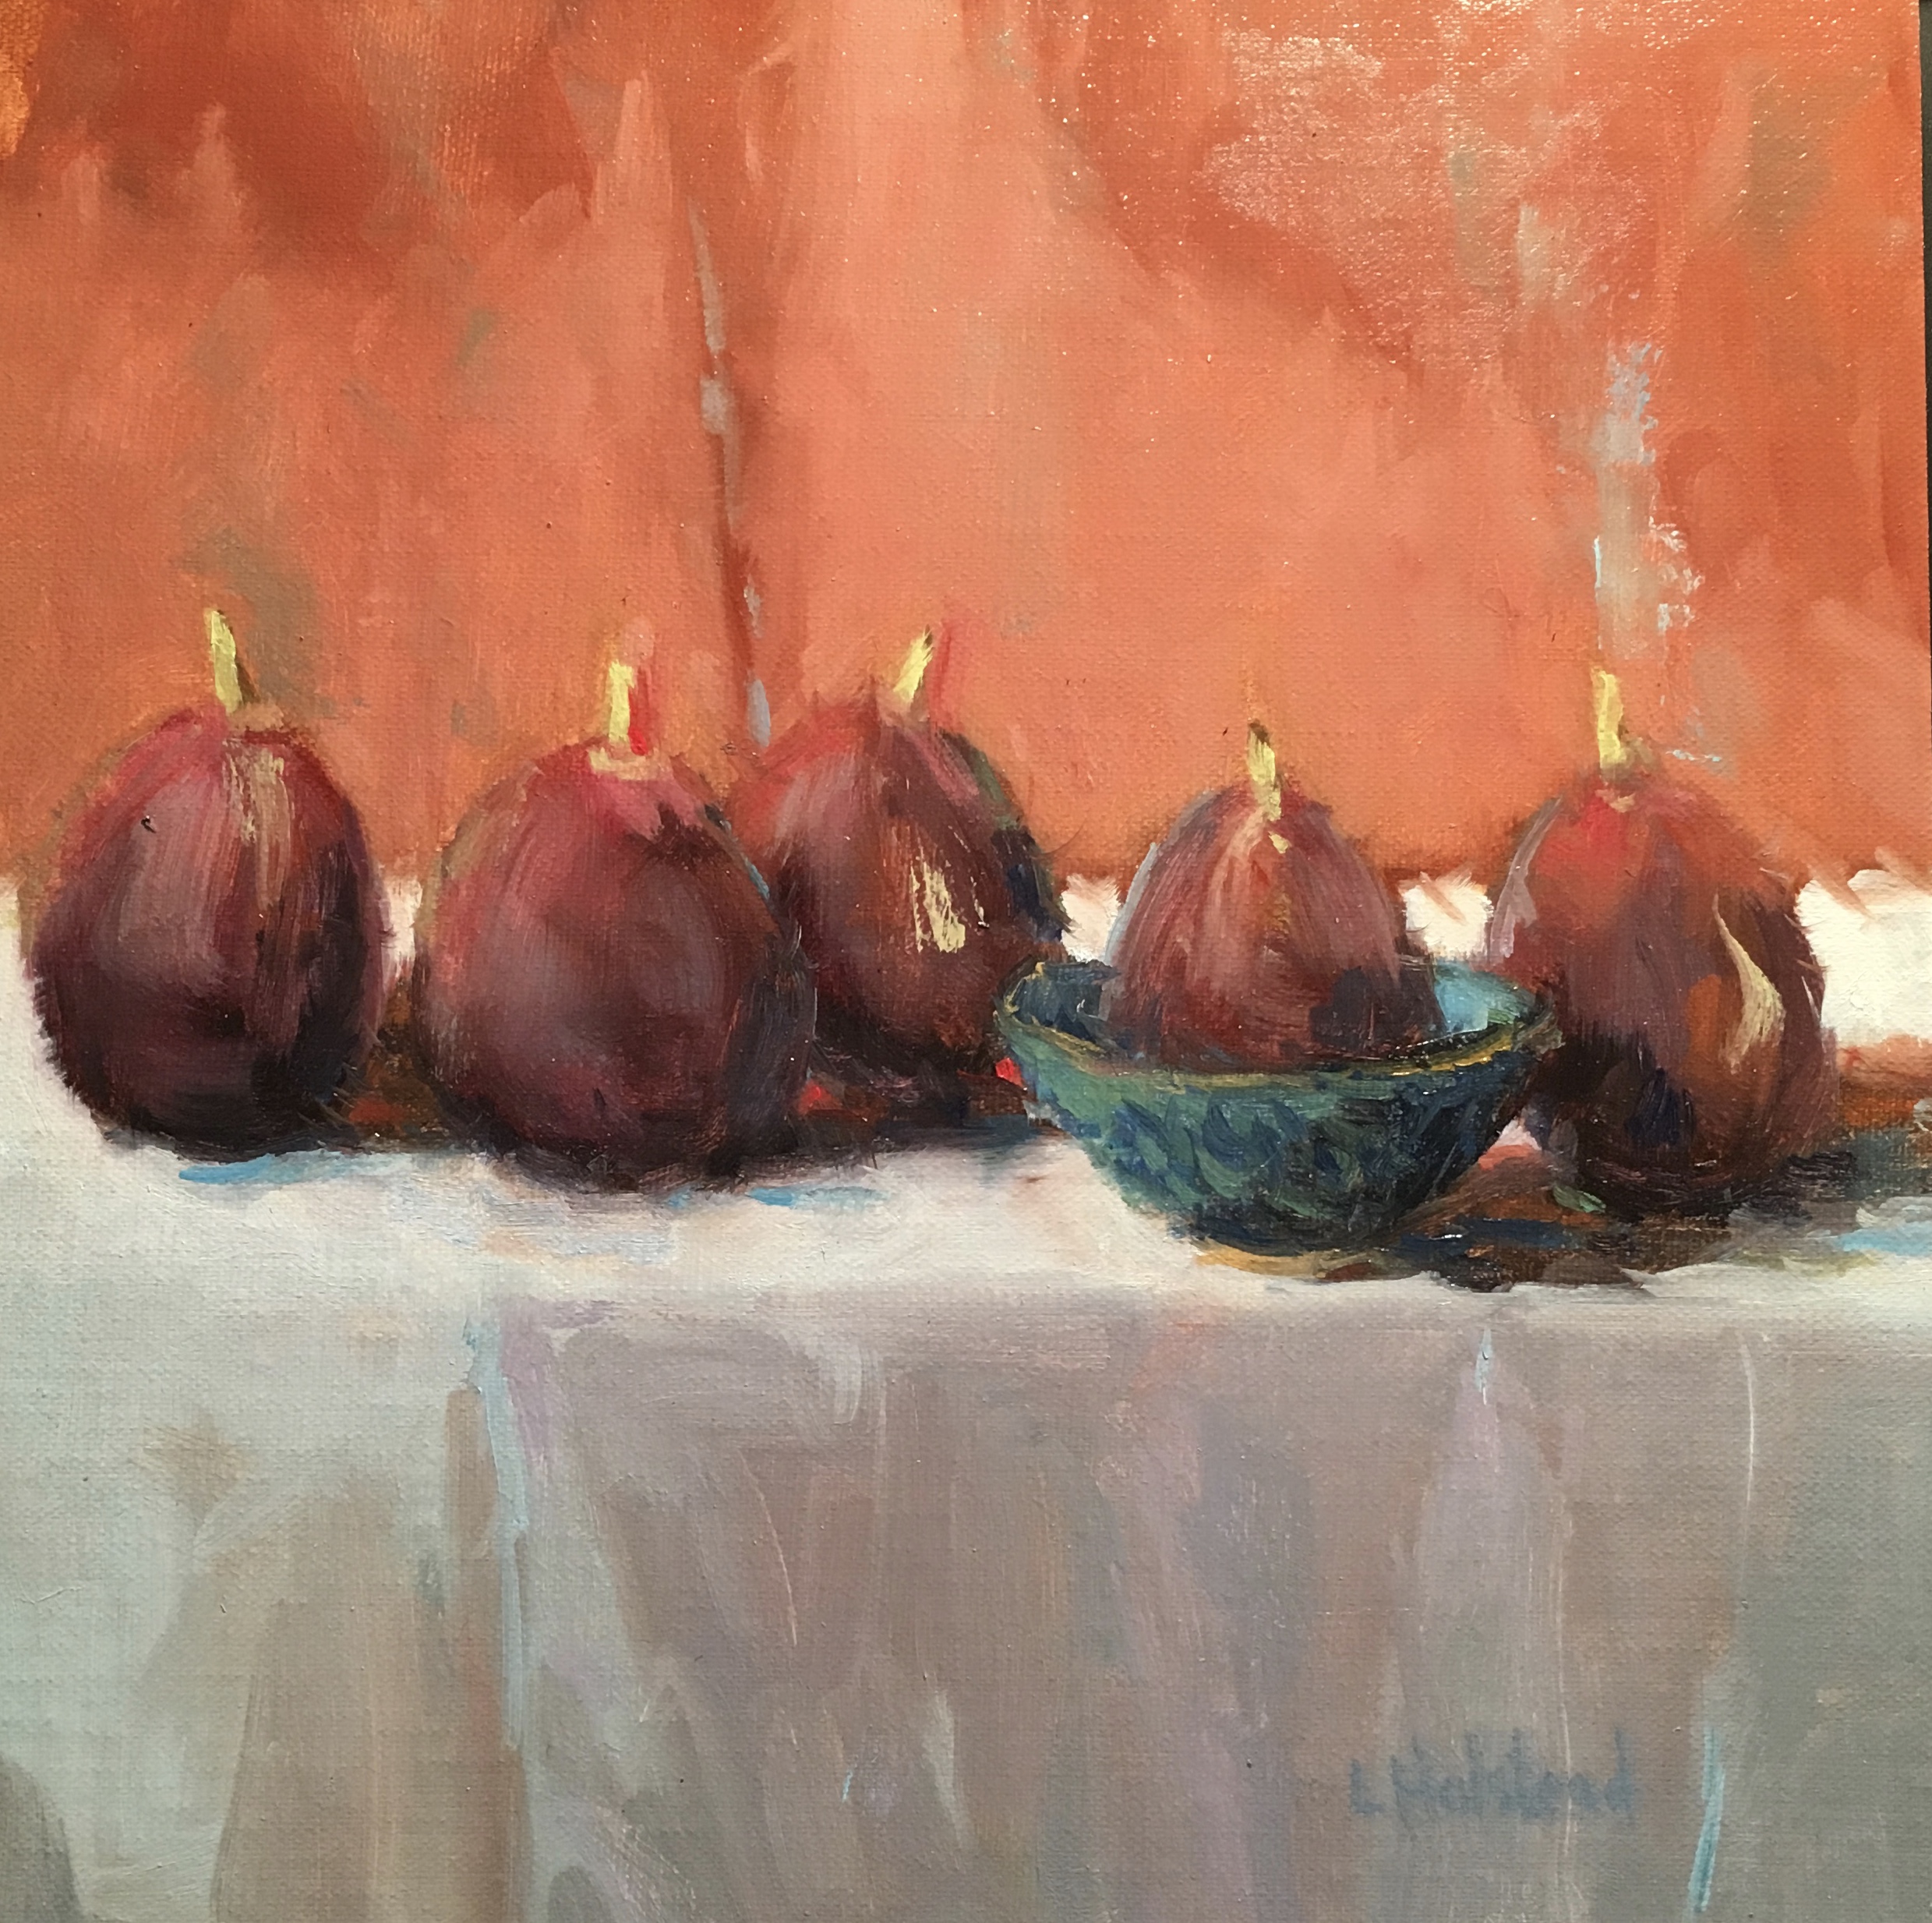 Figs, Venetian and Manganese, Oil on Linen, 8 x 8, sold